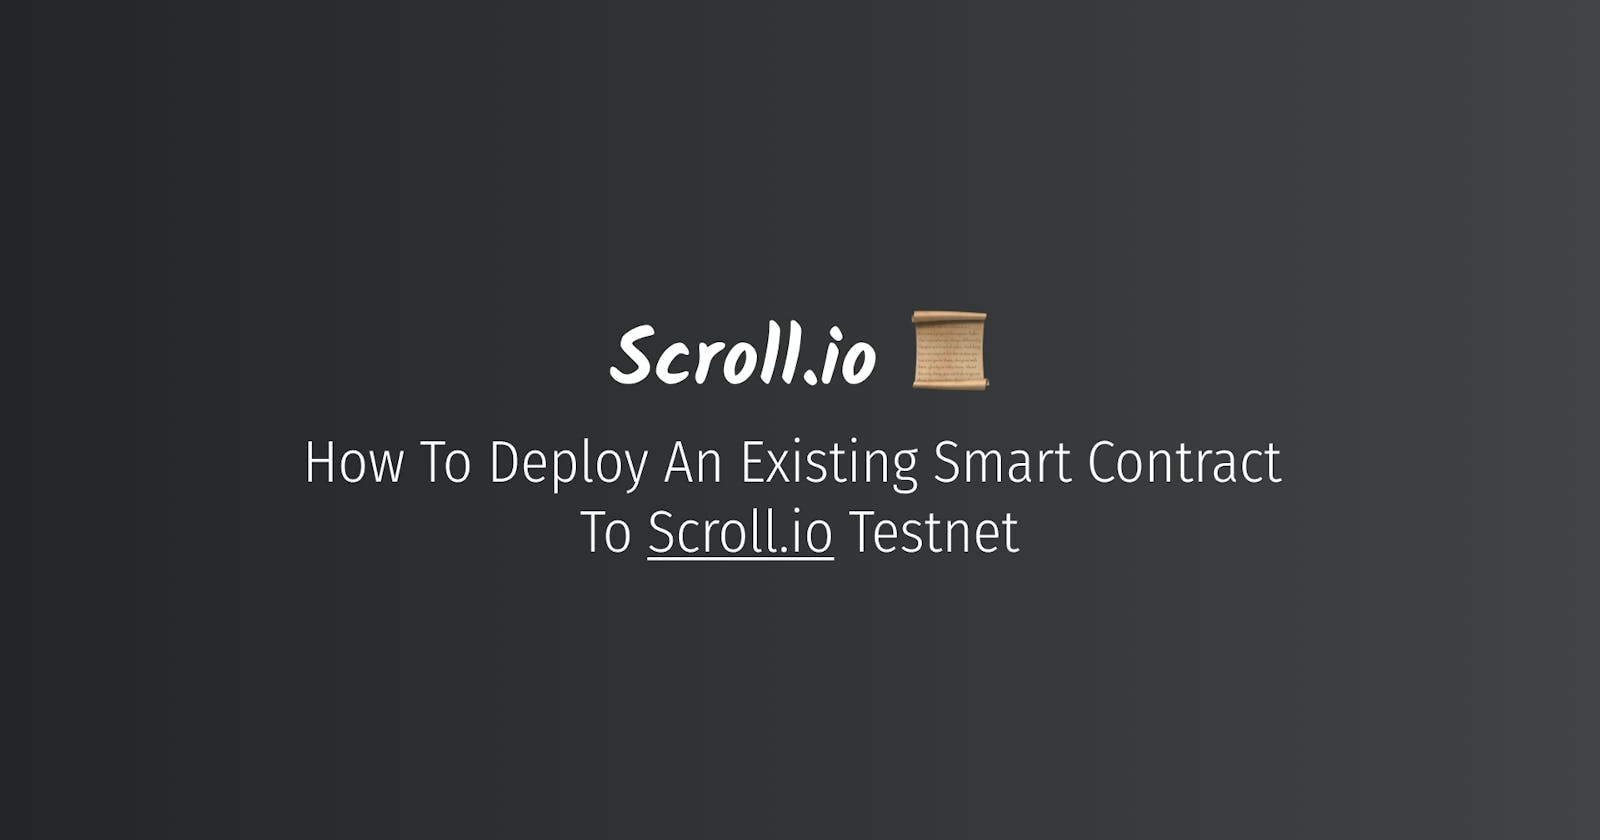 How To Deploy An Existing Smart Contract To Scroll.io Testnet